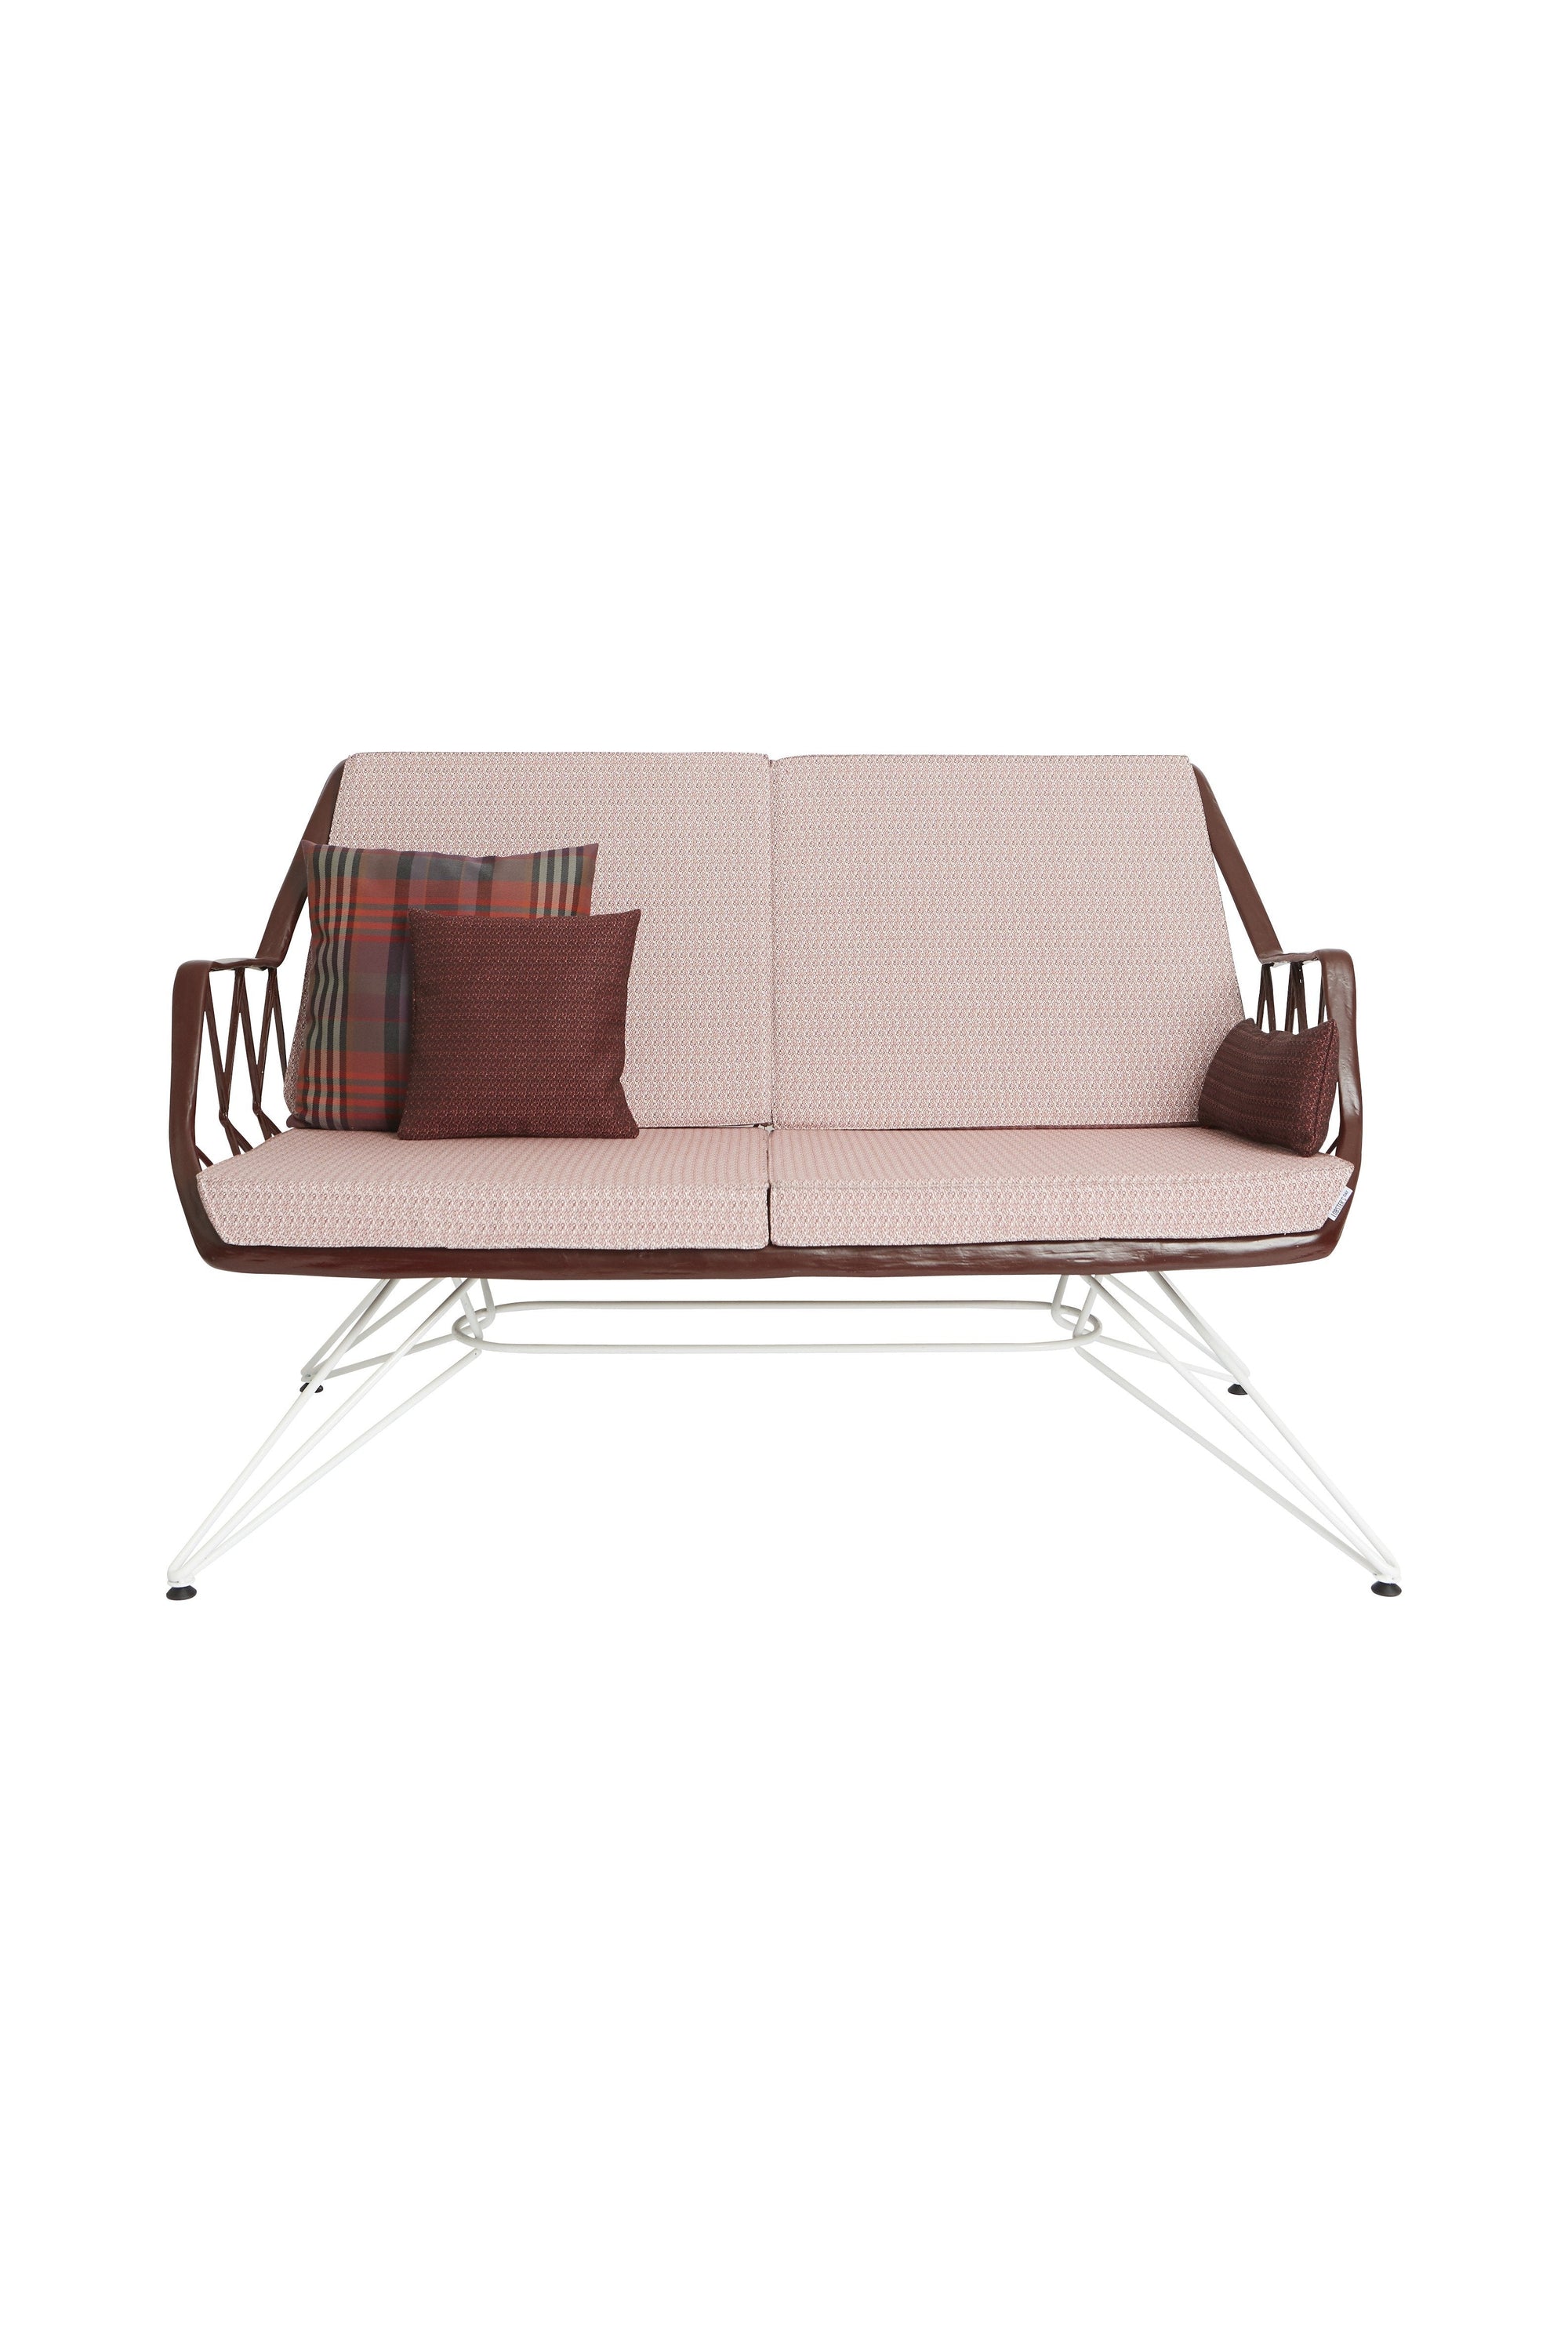 Rhombus 107/2 Sofa-Lobster's Day-Contract Furniture Store